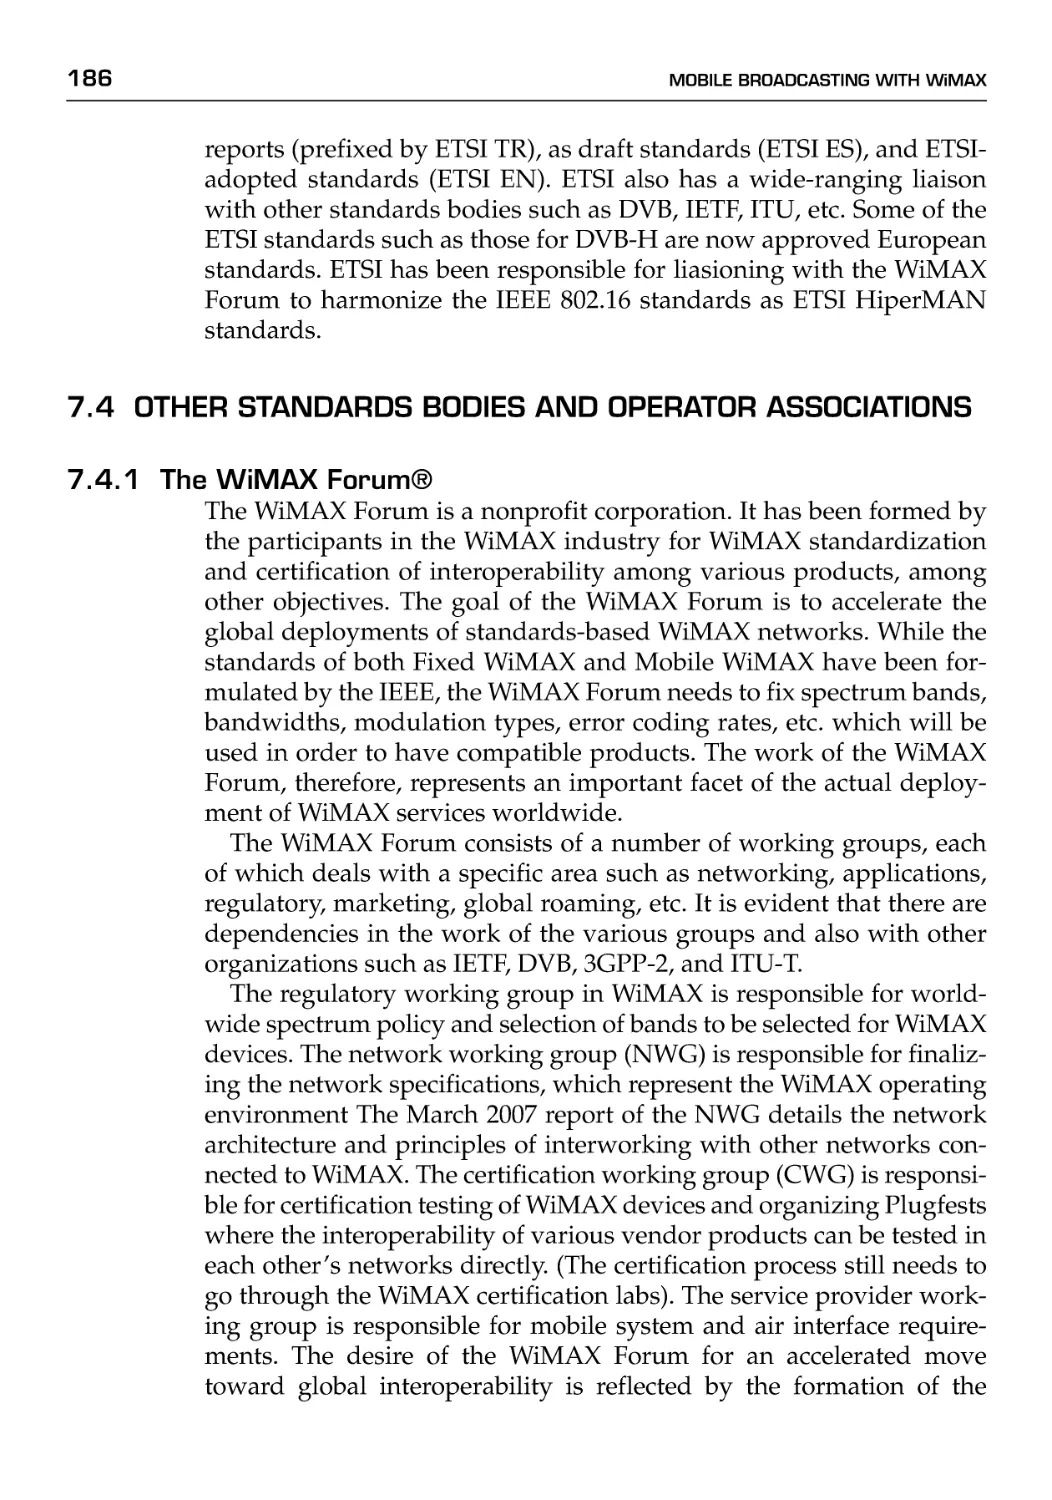 7.4 Other Standards Bodies and Operator Associations